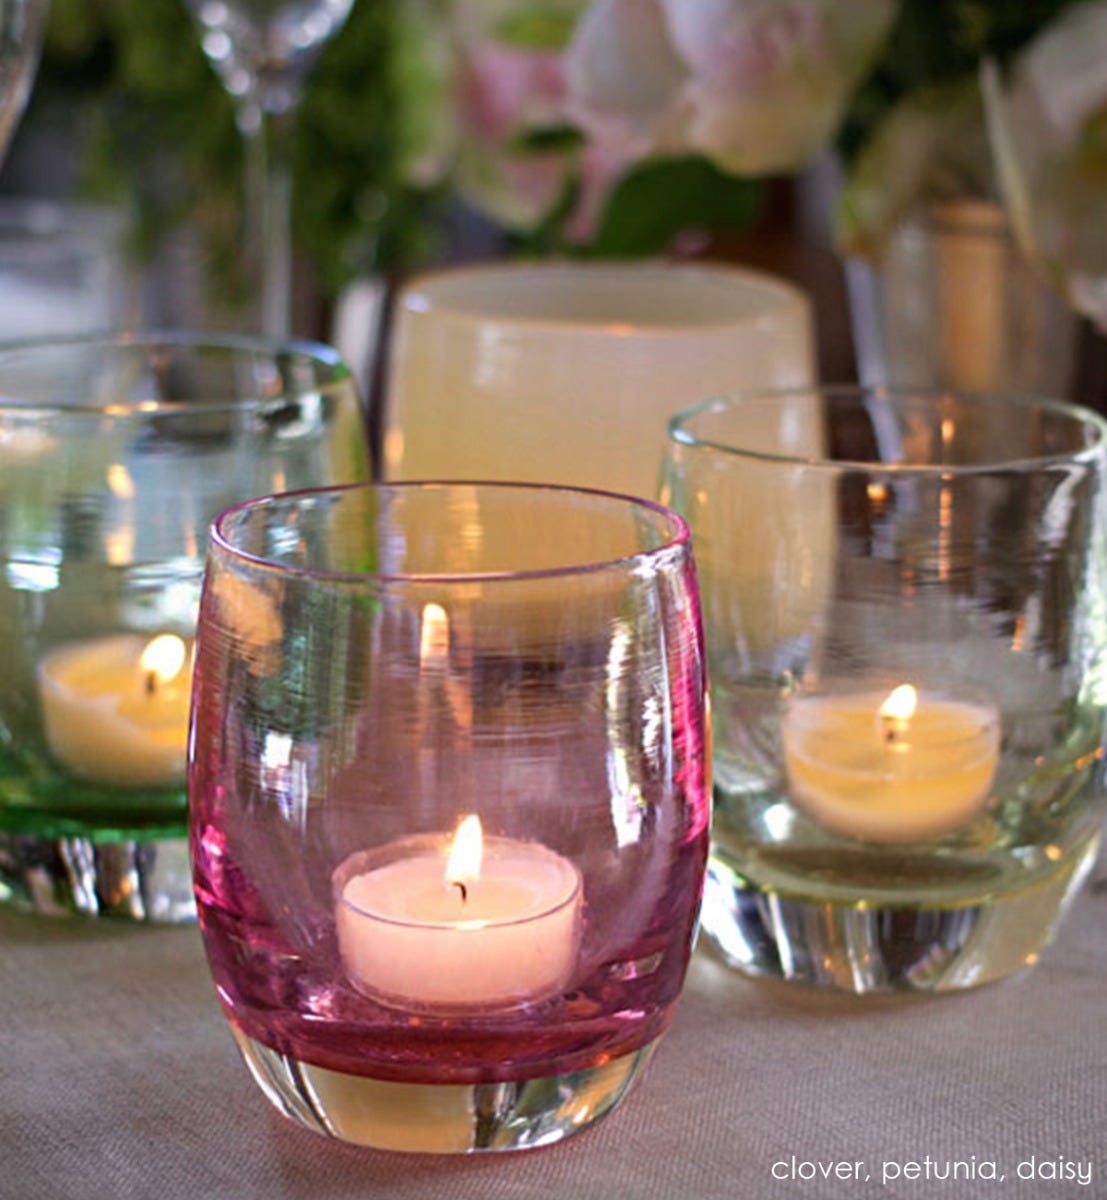 petunia transparent light pink hand-blown glass votive candle holder. Paired with clover and daisy.